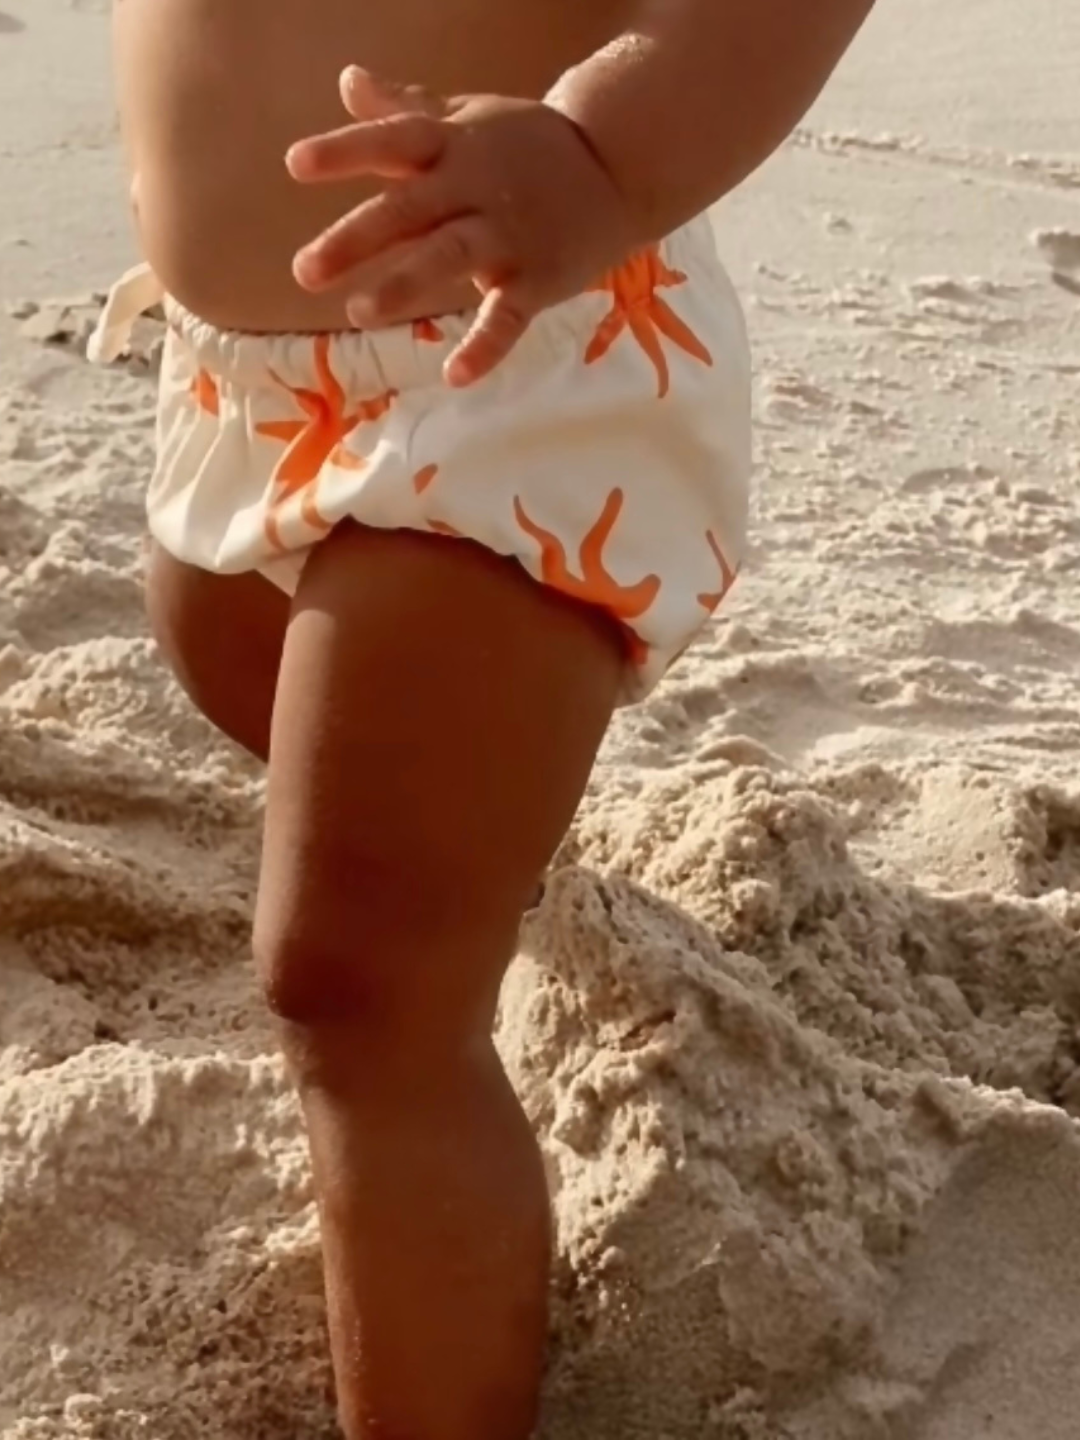 A waist-down image of a toddler wearing the Capri swim diaper in cream with orange stars all over, standing on sand.